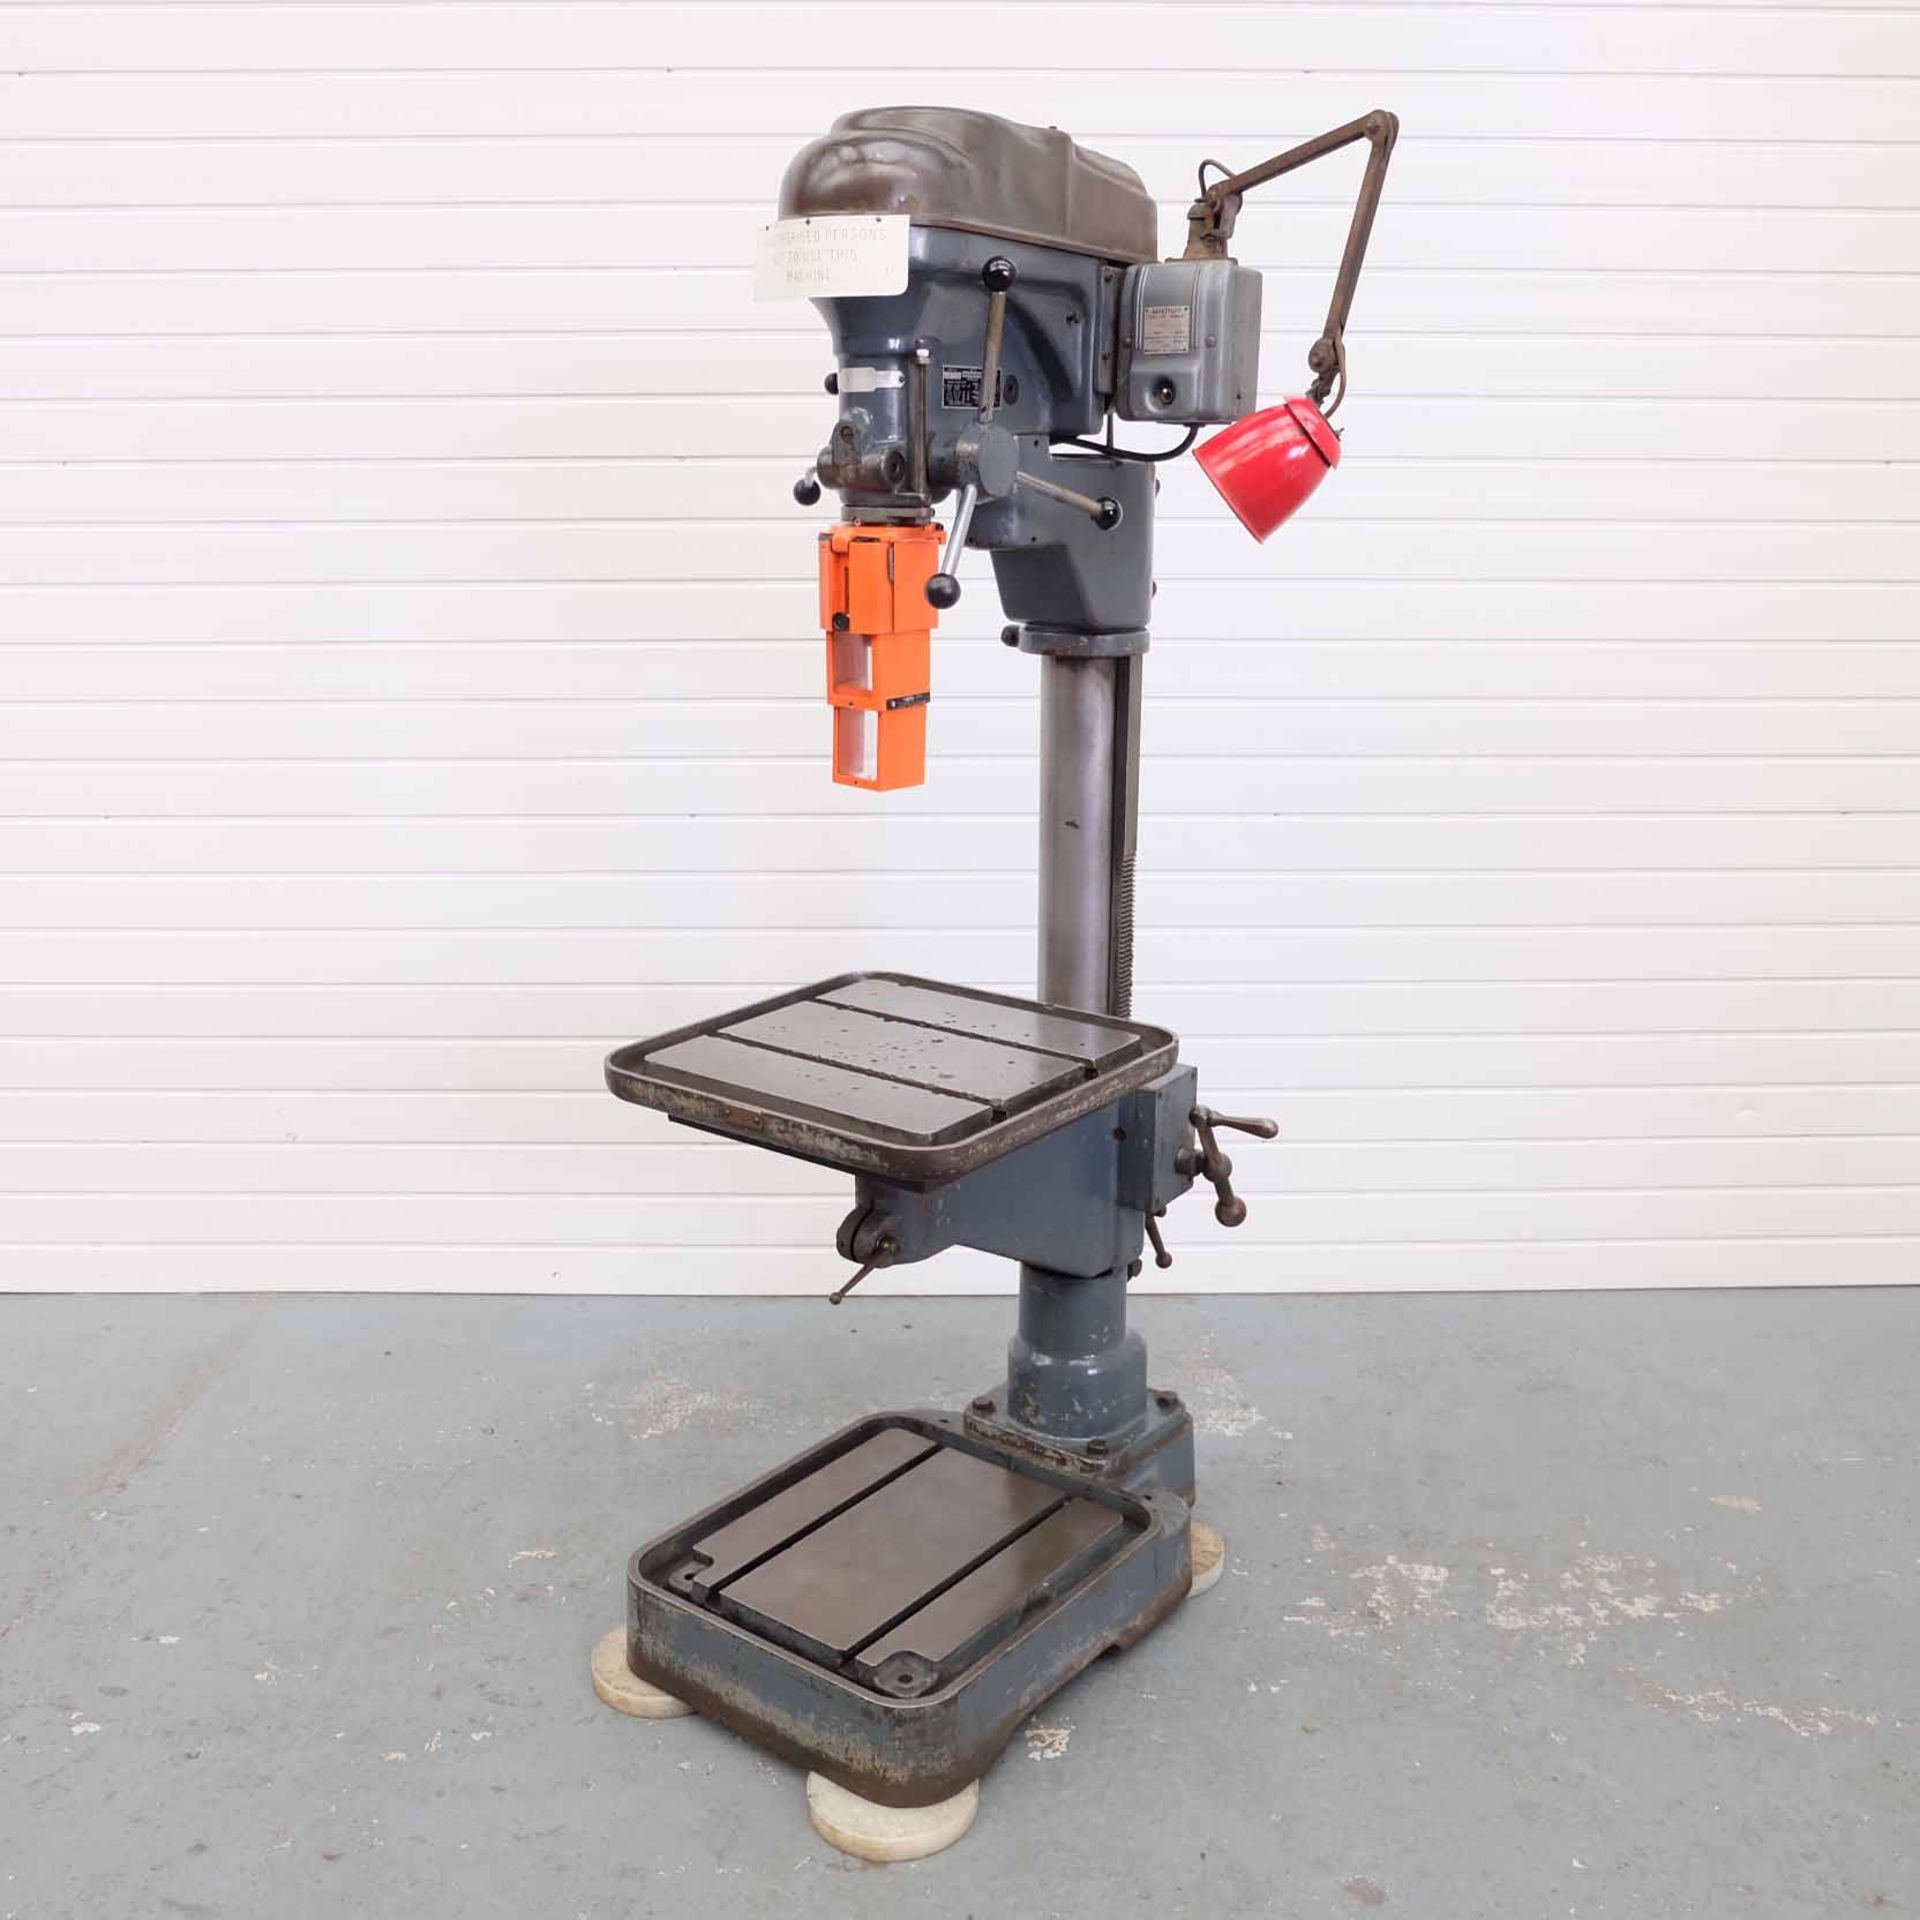 Meddings Pacera Pillar Drill With Articulated Swivel Head. Table Size 20" x 20". Throat 14". Spindle